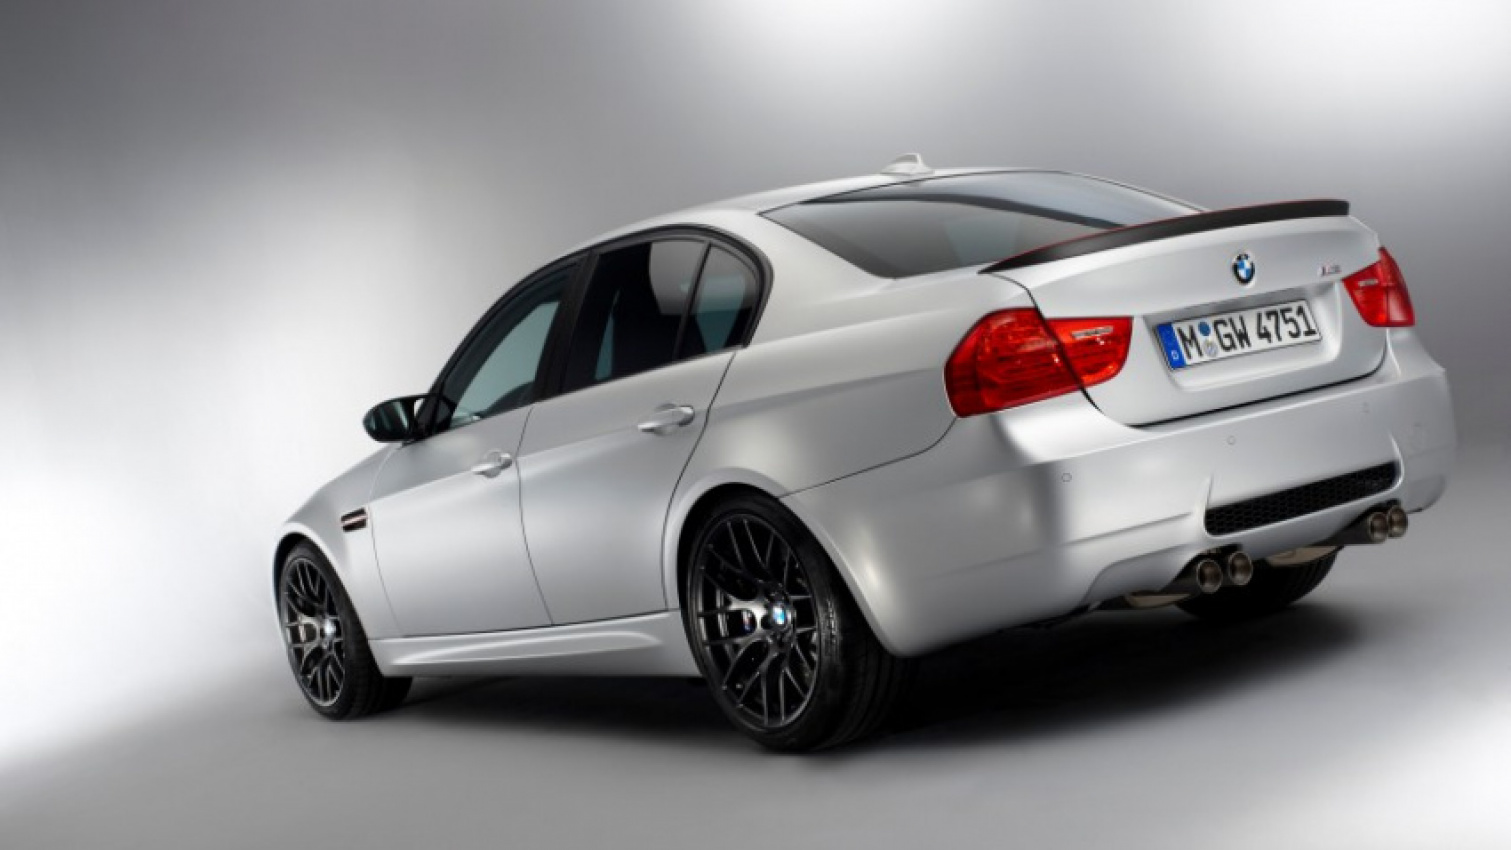 autos, cars, features, bmw, bmw m3, e92, e92 bmw m3, the car i would buy if i had r500,000